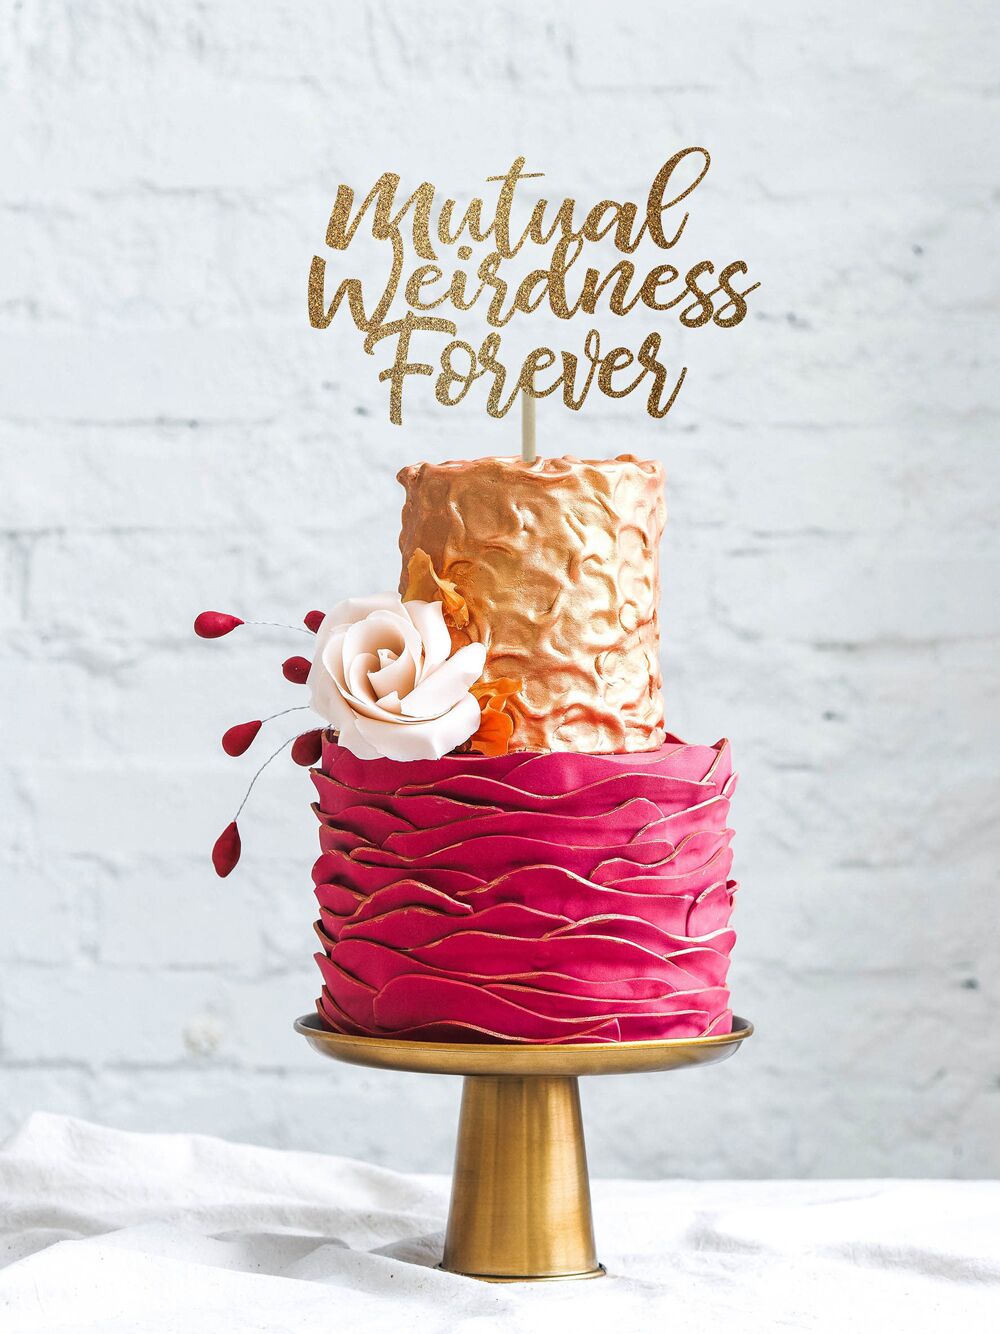 Sparkly Mutual Weirdness Forever wedding cake topper